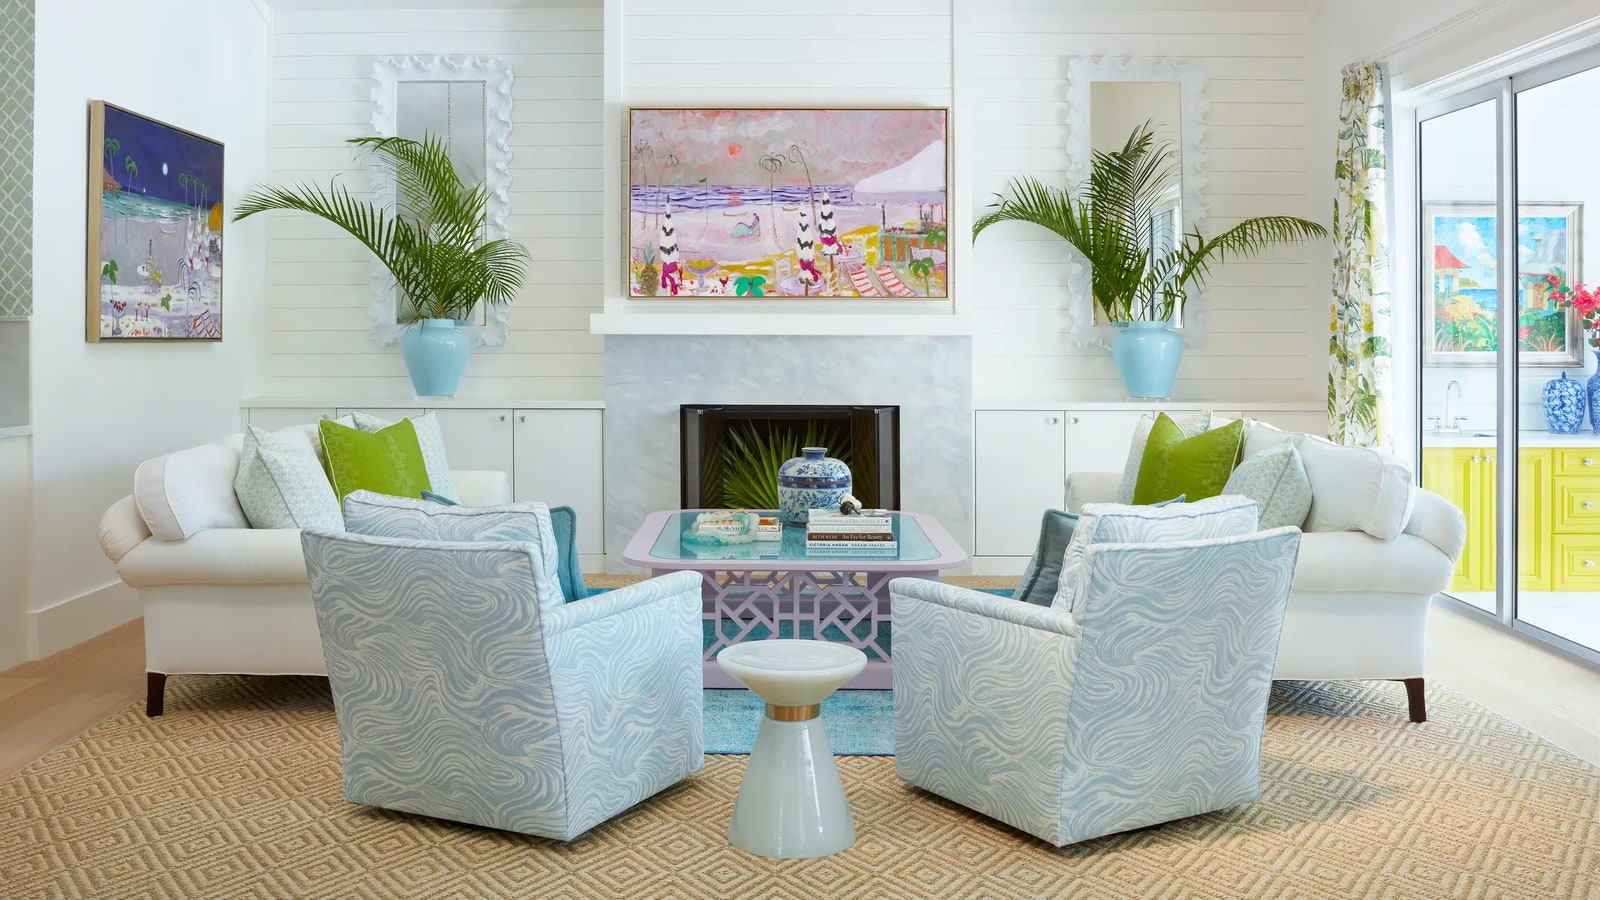 This Jupiter Florida home was entirely renovated by JMA Interior Design to create a relaxed cool beach house with an...